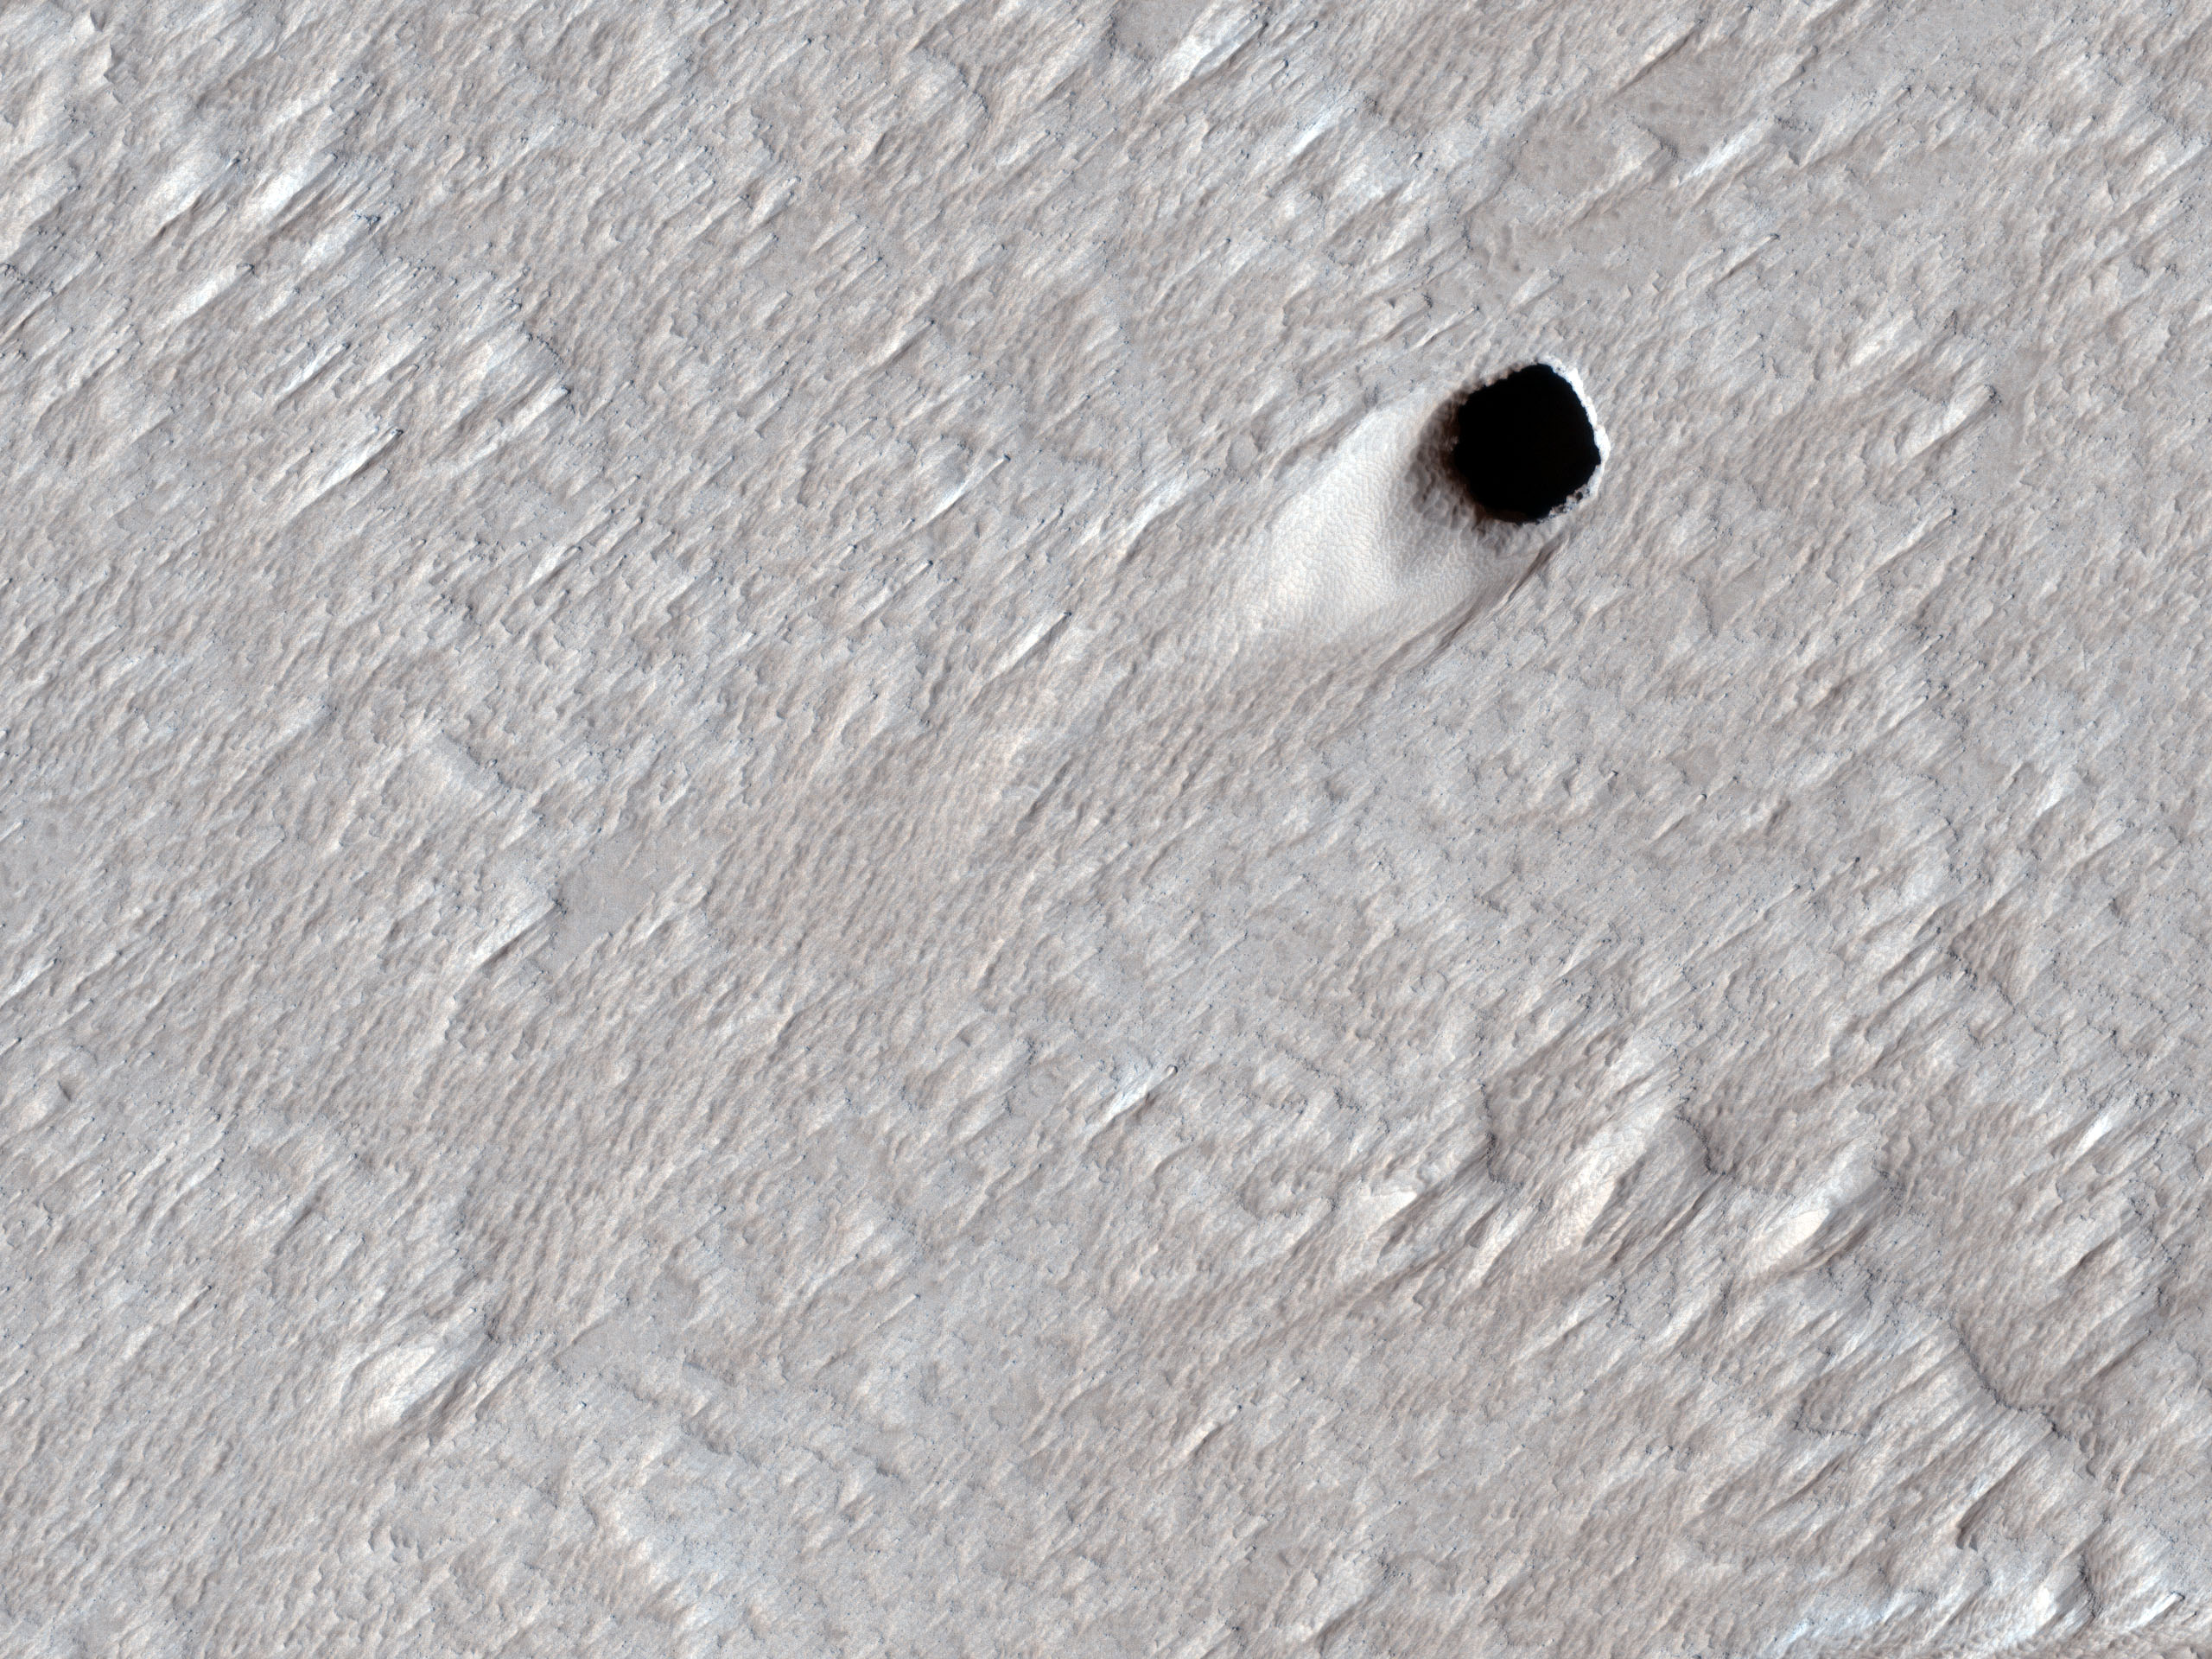 Pit Craters and Giant Volcanoes